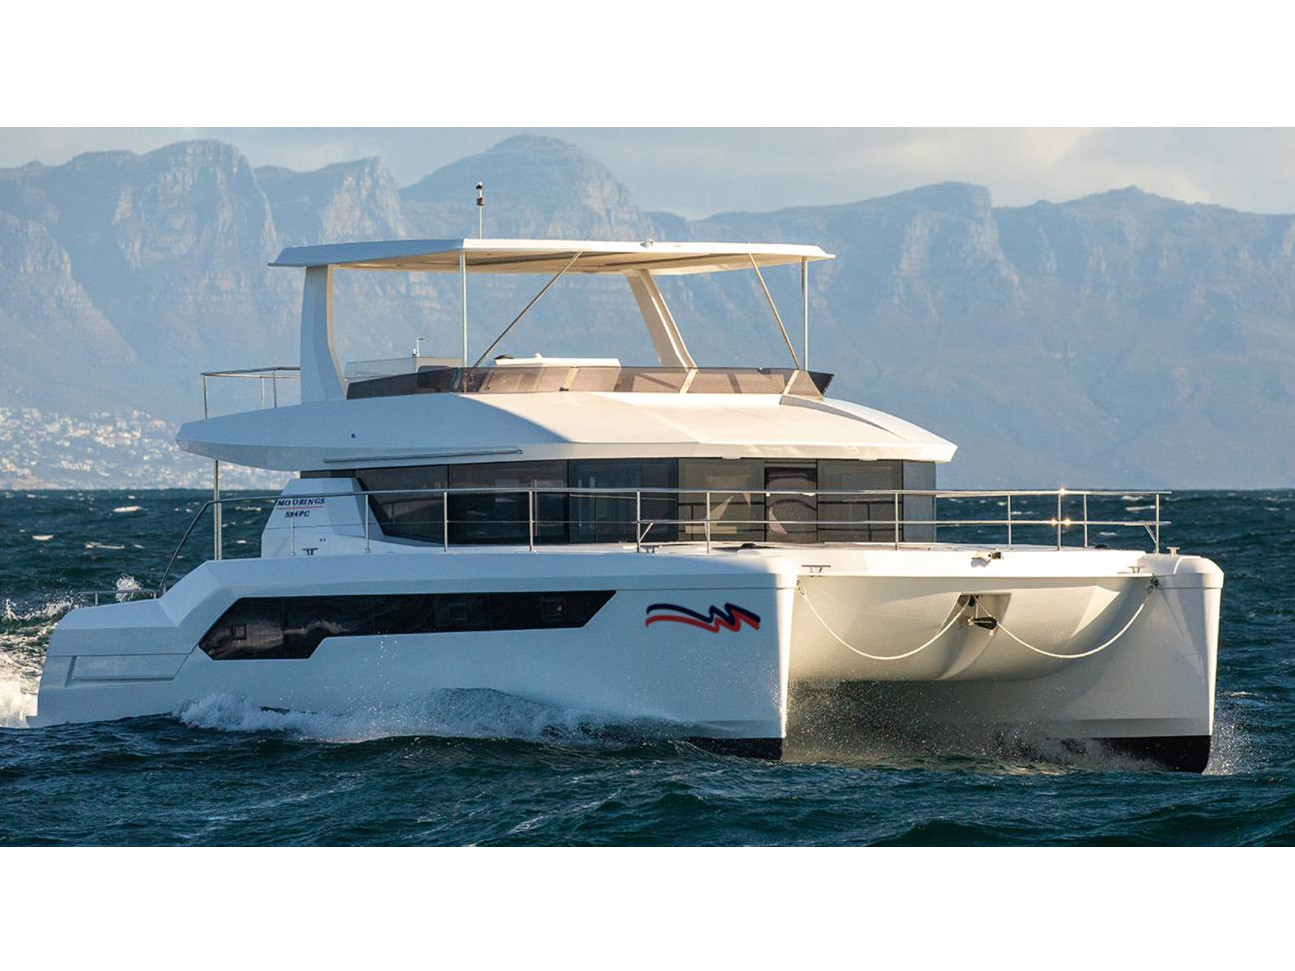 Yacht charter Leopard 53 PC - Bahamas, Abacos, Marsh Harbour